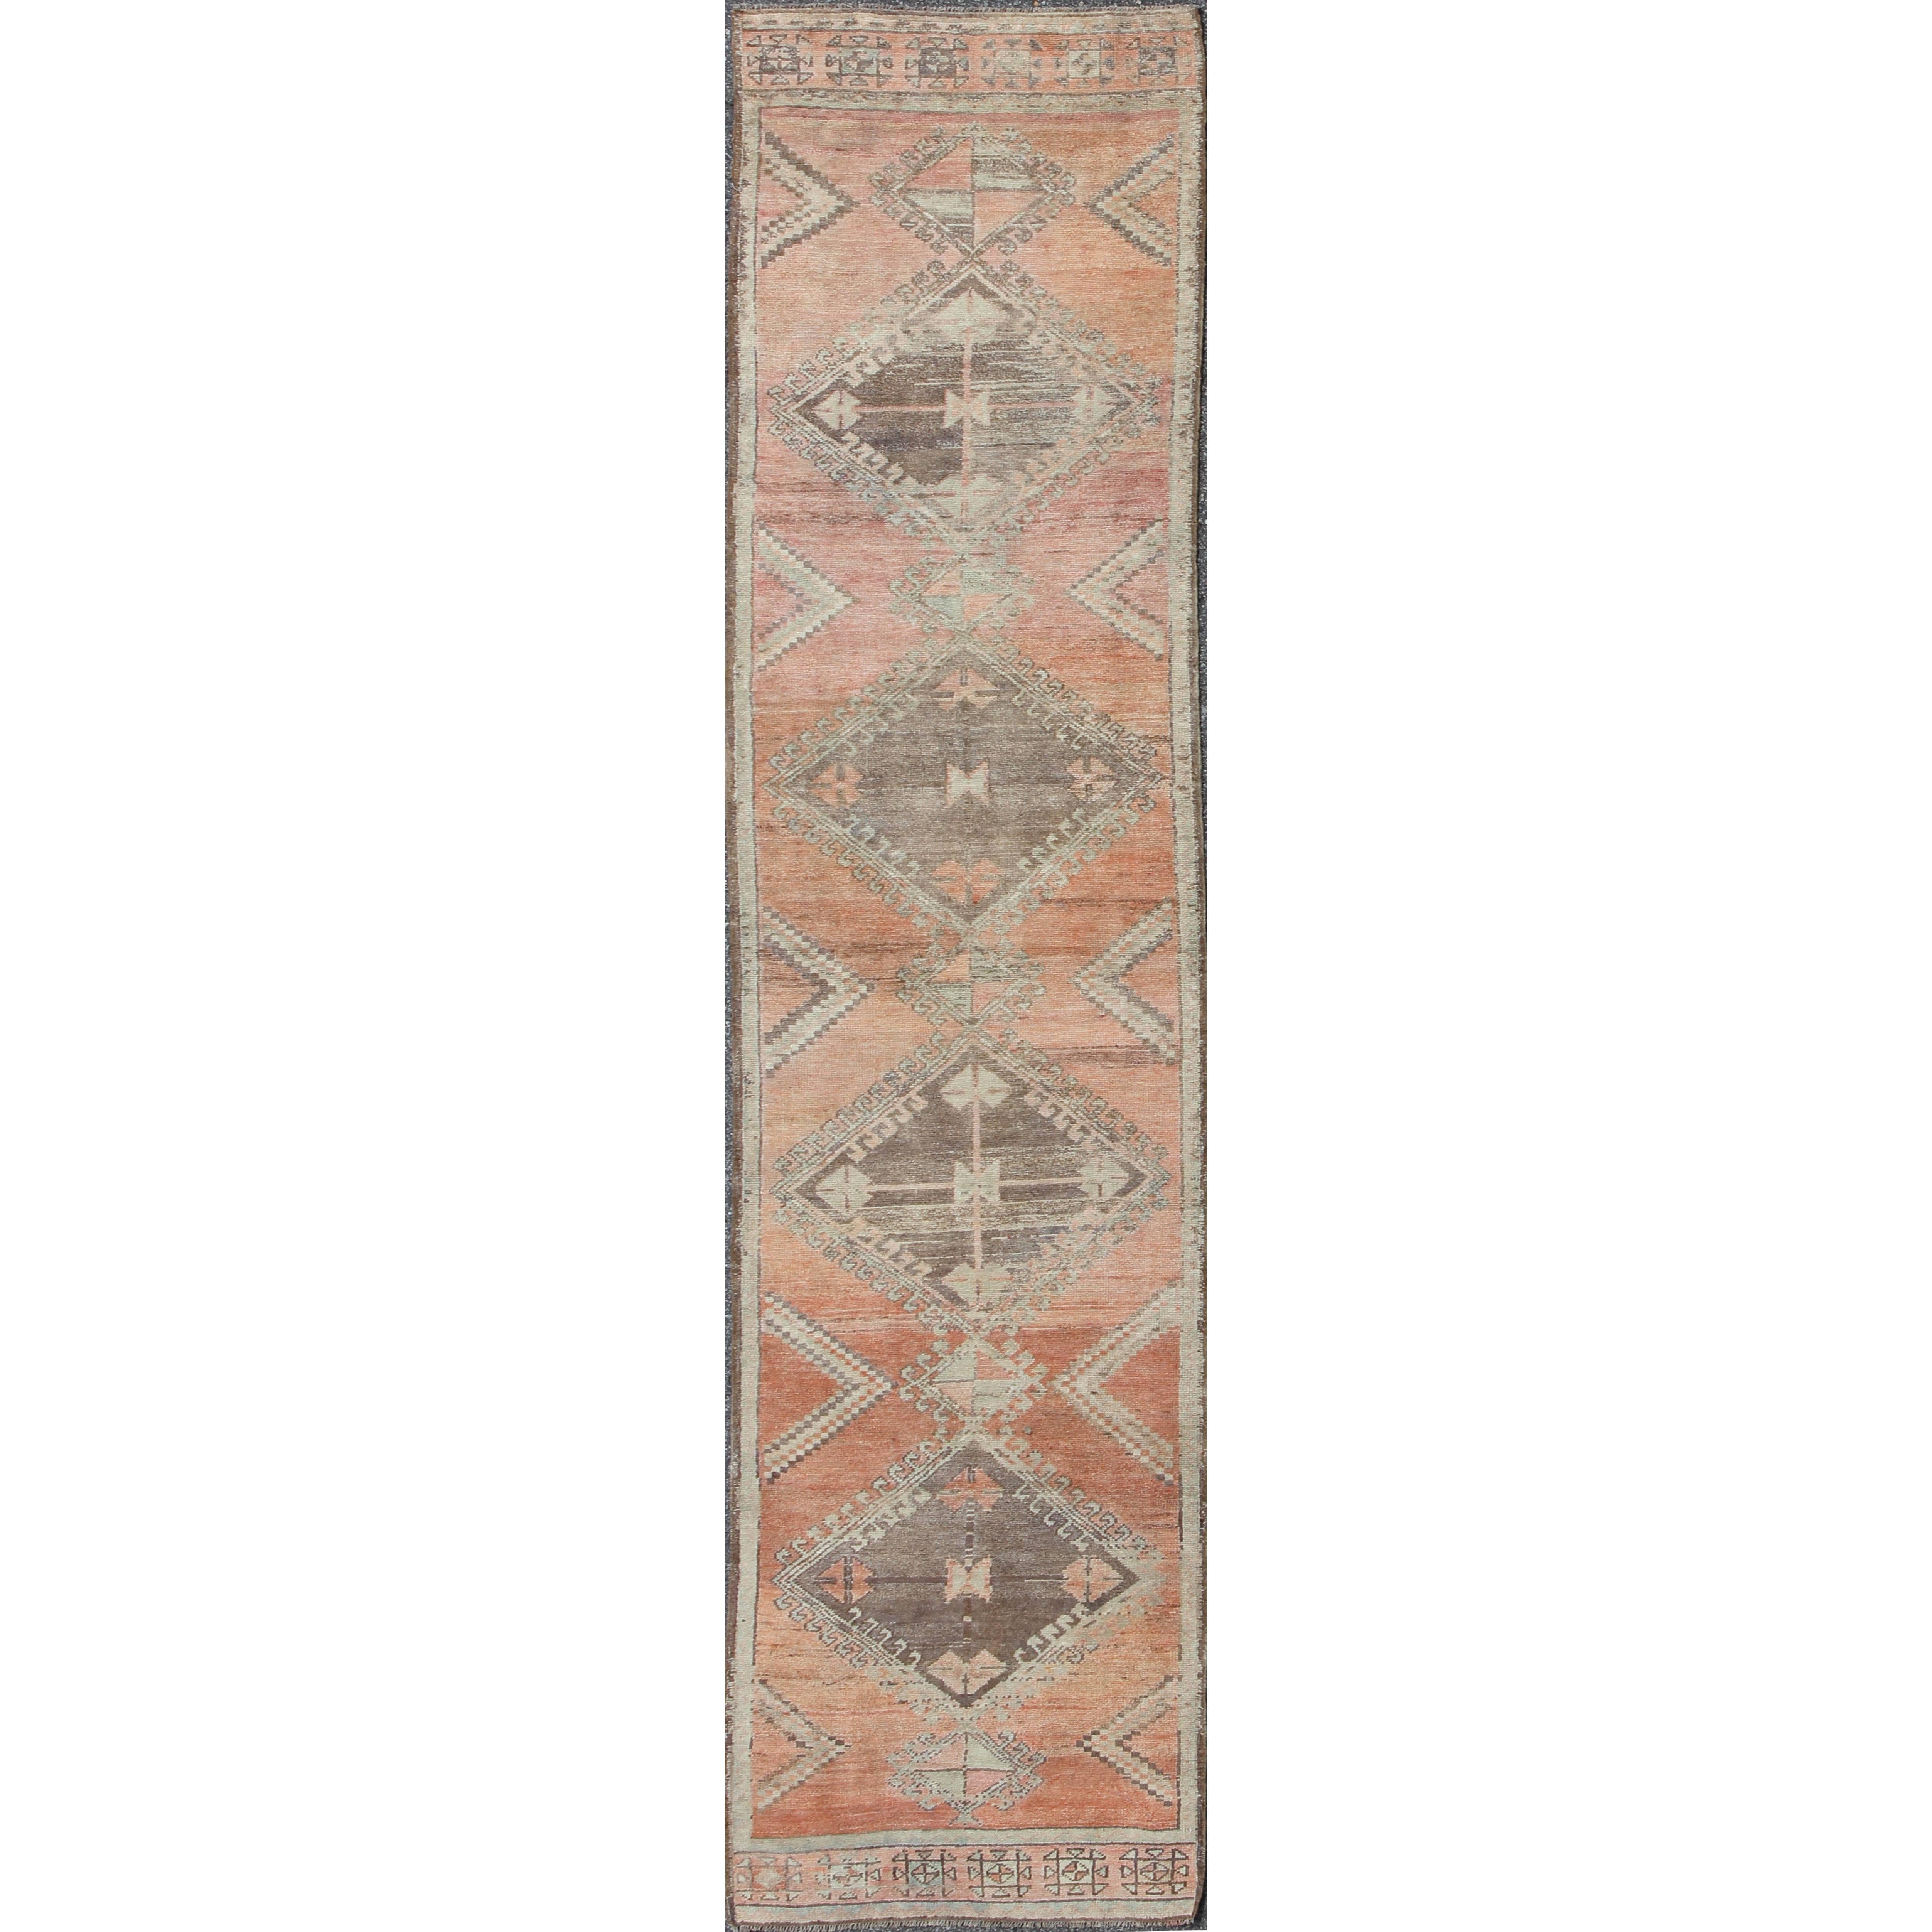 Turkish Oushak Runner with Multi-Medallions and Tribal Motifs in Brown and Red